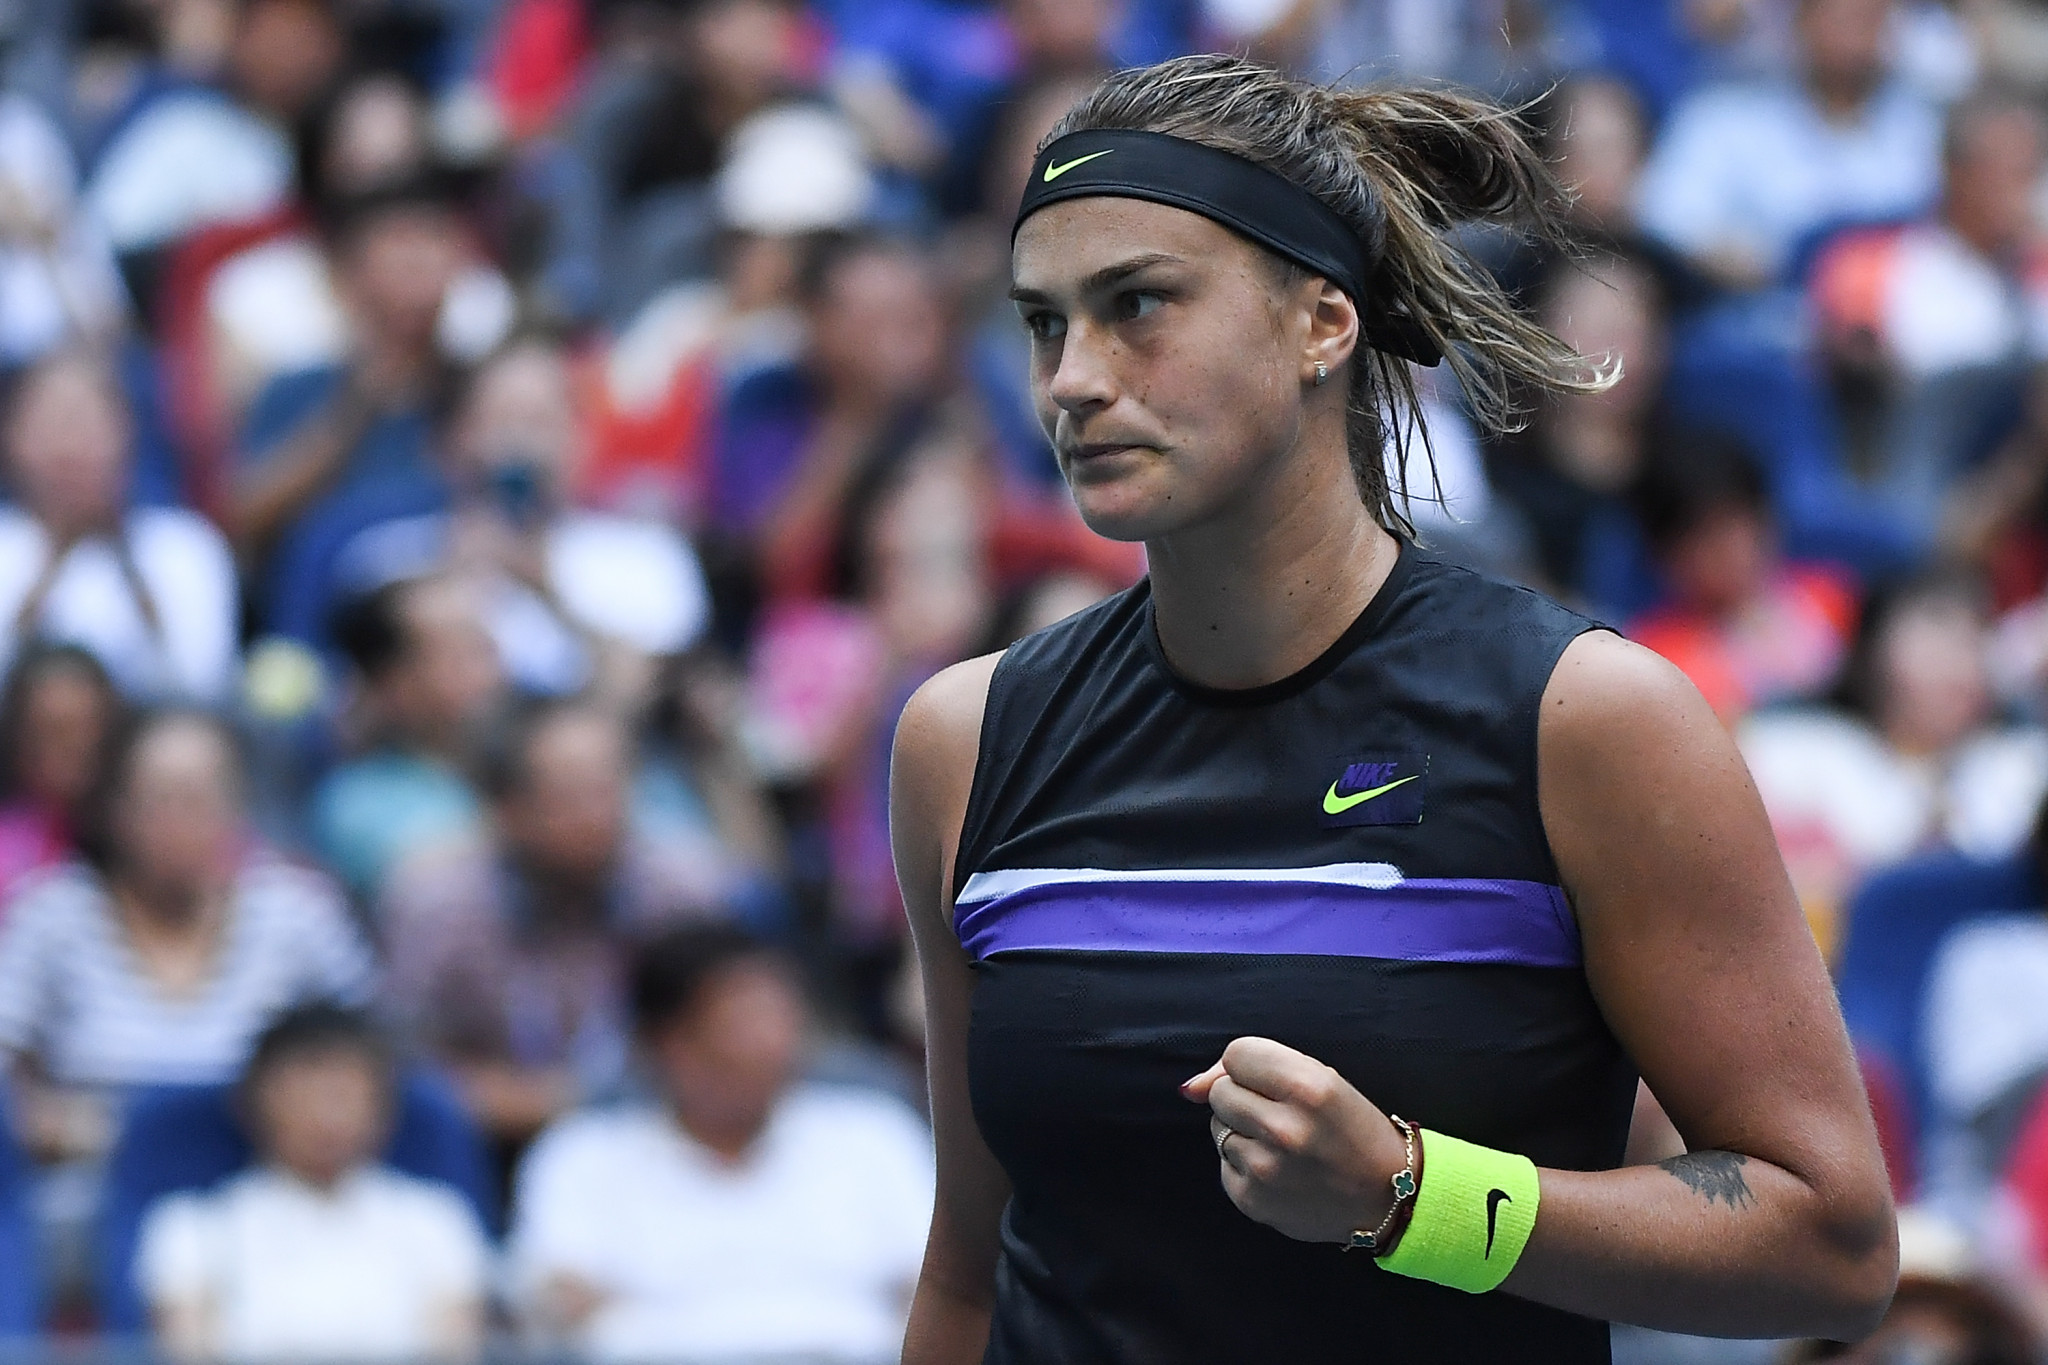 Sabalenka defends Wuhan Open title with three-set win over Riske